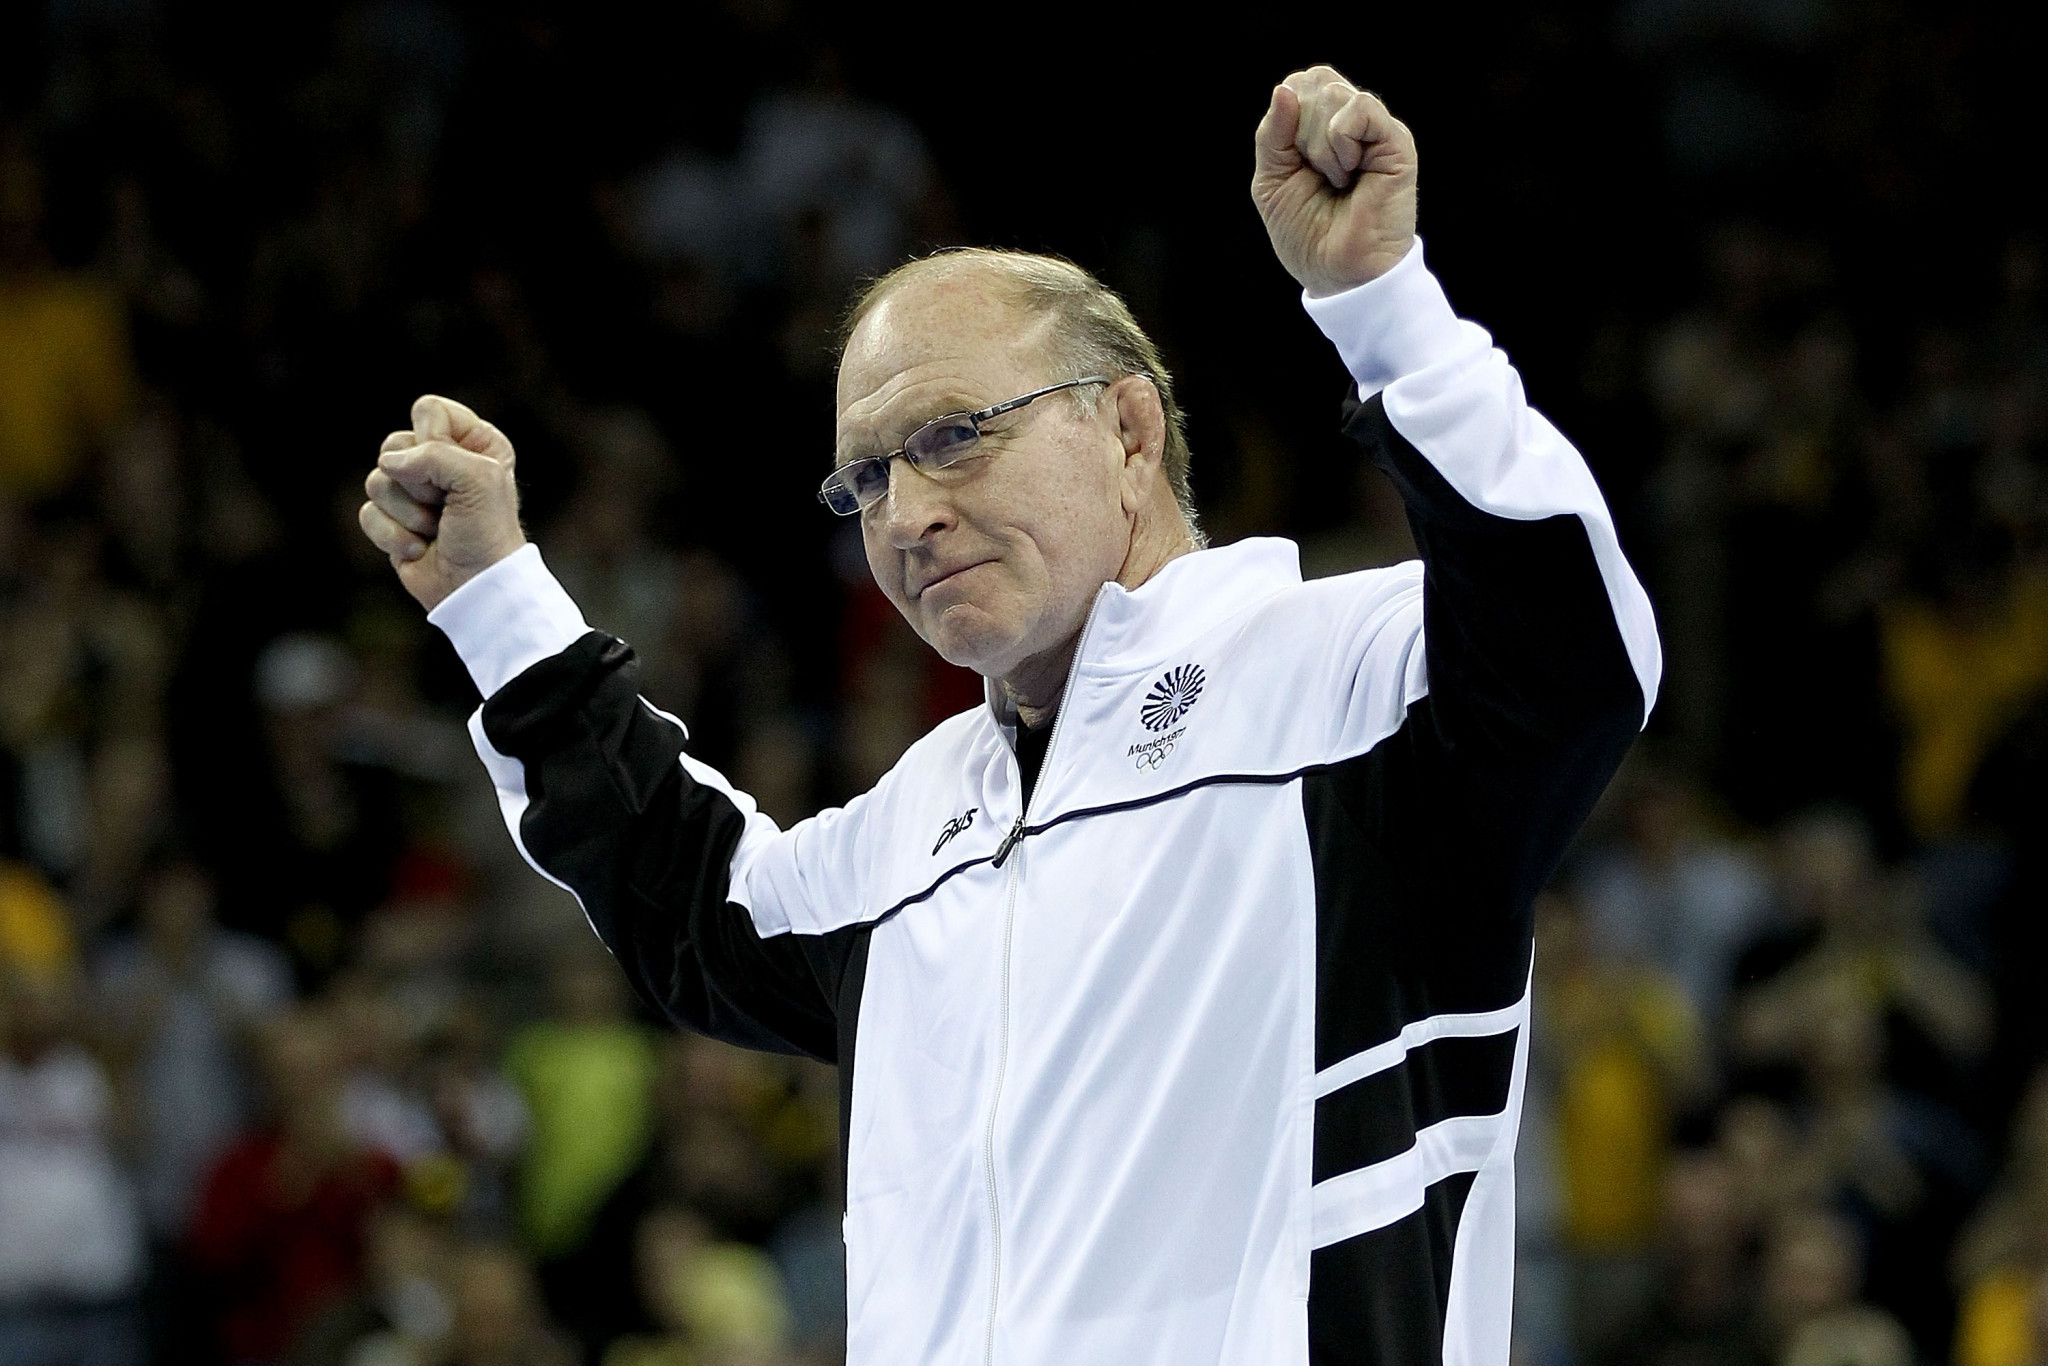 Wrestling legend Dan Gable will receive the Presidential Medal of Freedom ©Getty Images